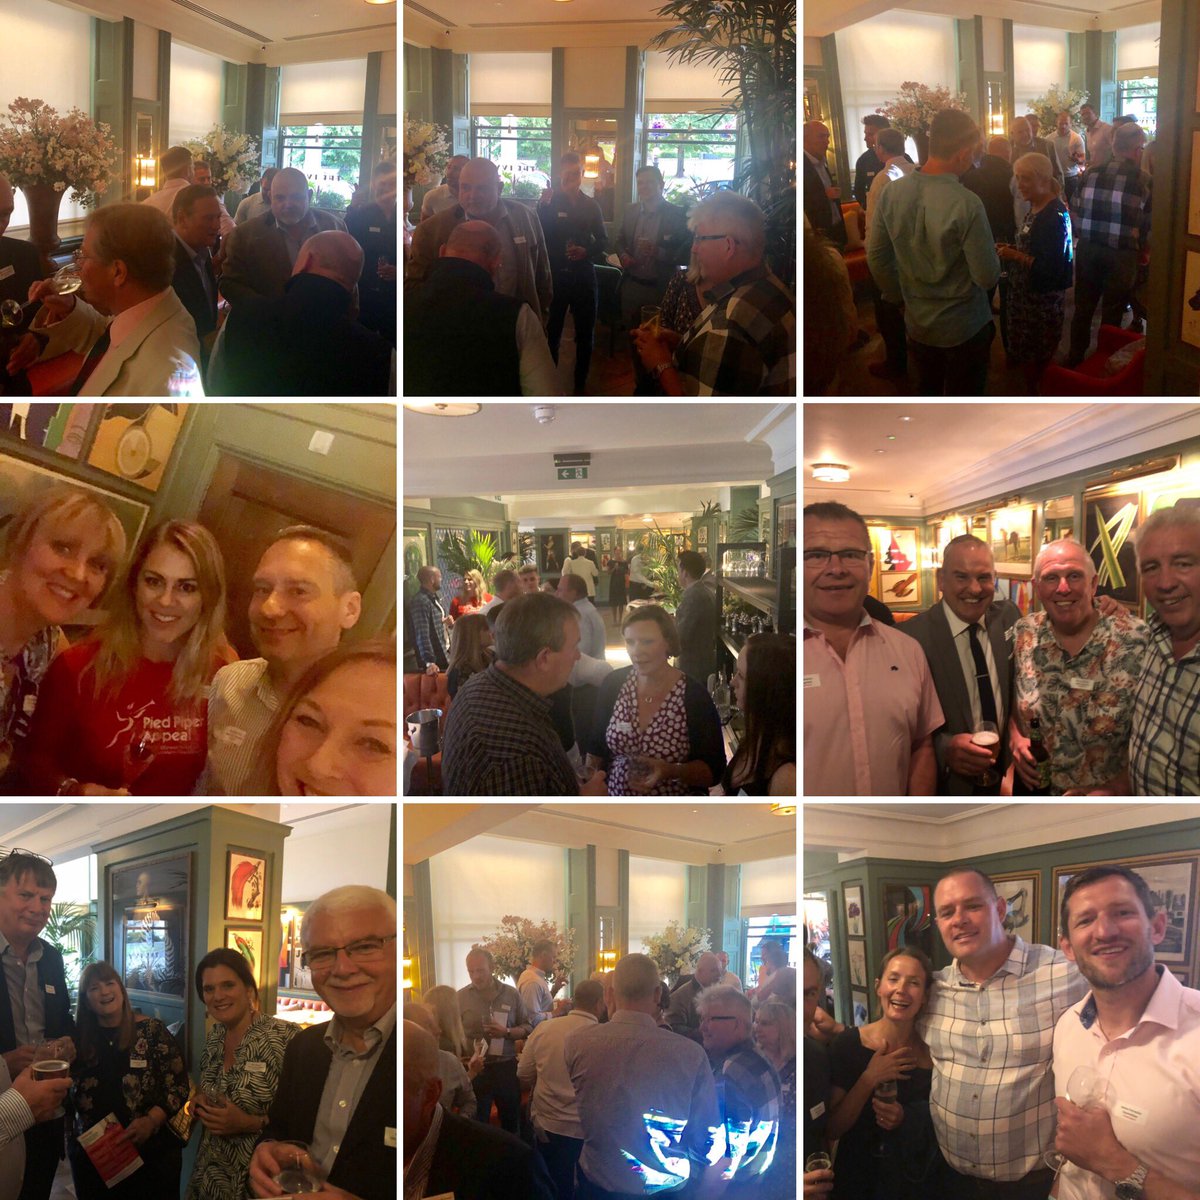 A few pics from the @trindermonial launch & such great support @Circle2Success @BraceCreative @QueensHeadLford @cellarsupplies @RagingBullLtd @WaterCoolersUK @creedfs @gloucesterrugby @theivybrasserie @ThinkSimplicity @PinPointUK @smarthomesounds @smartcommsglos @PiedPiperAppeal